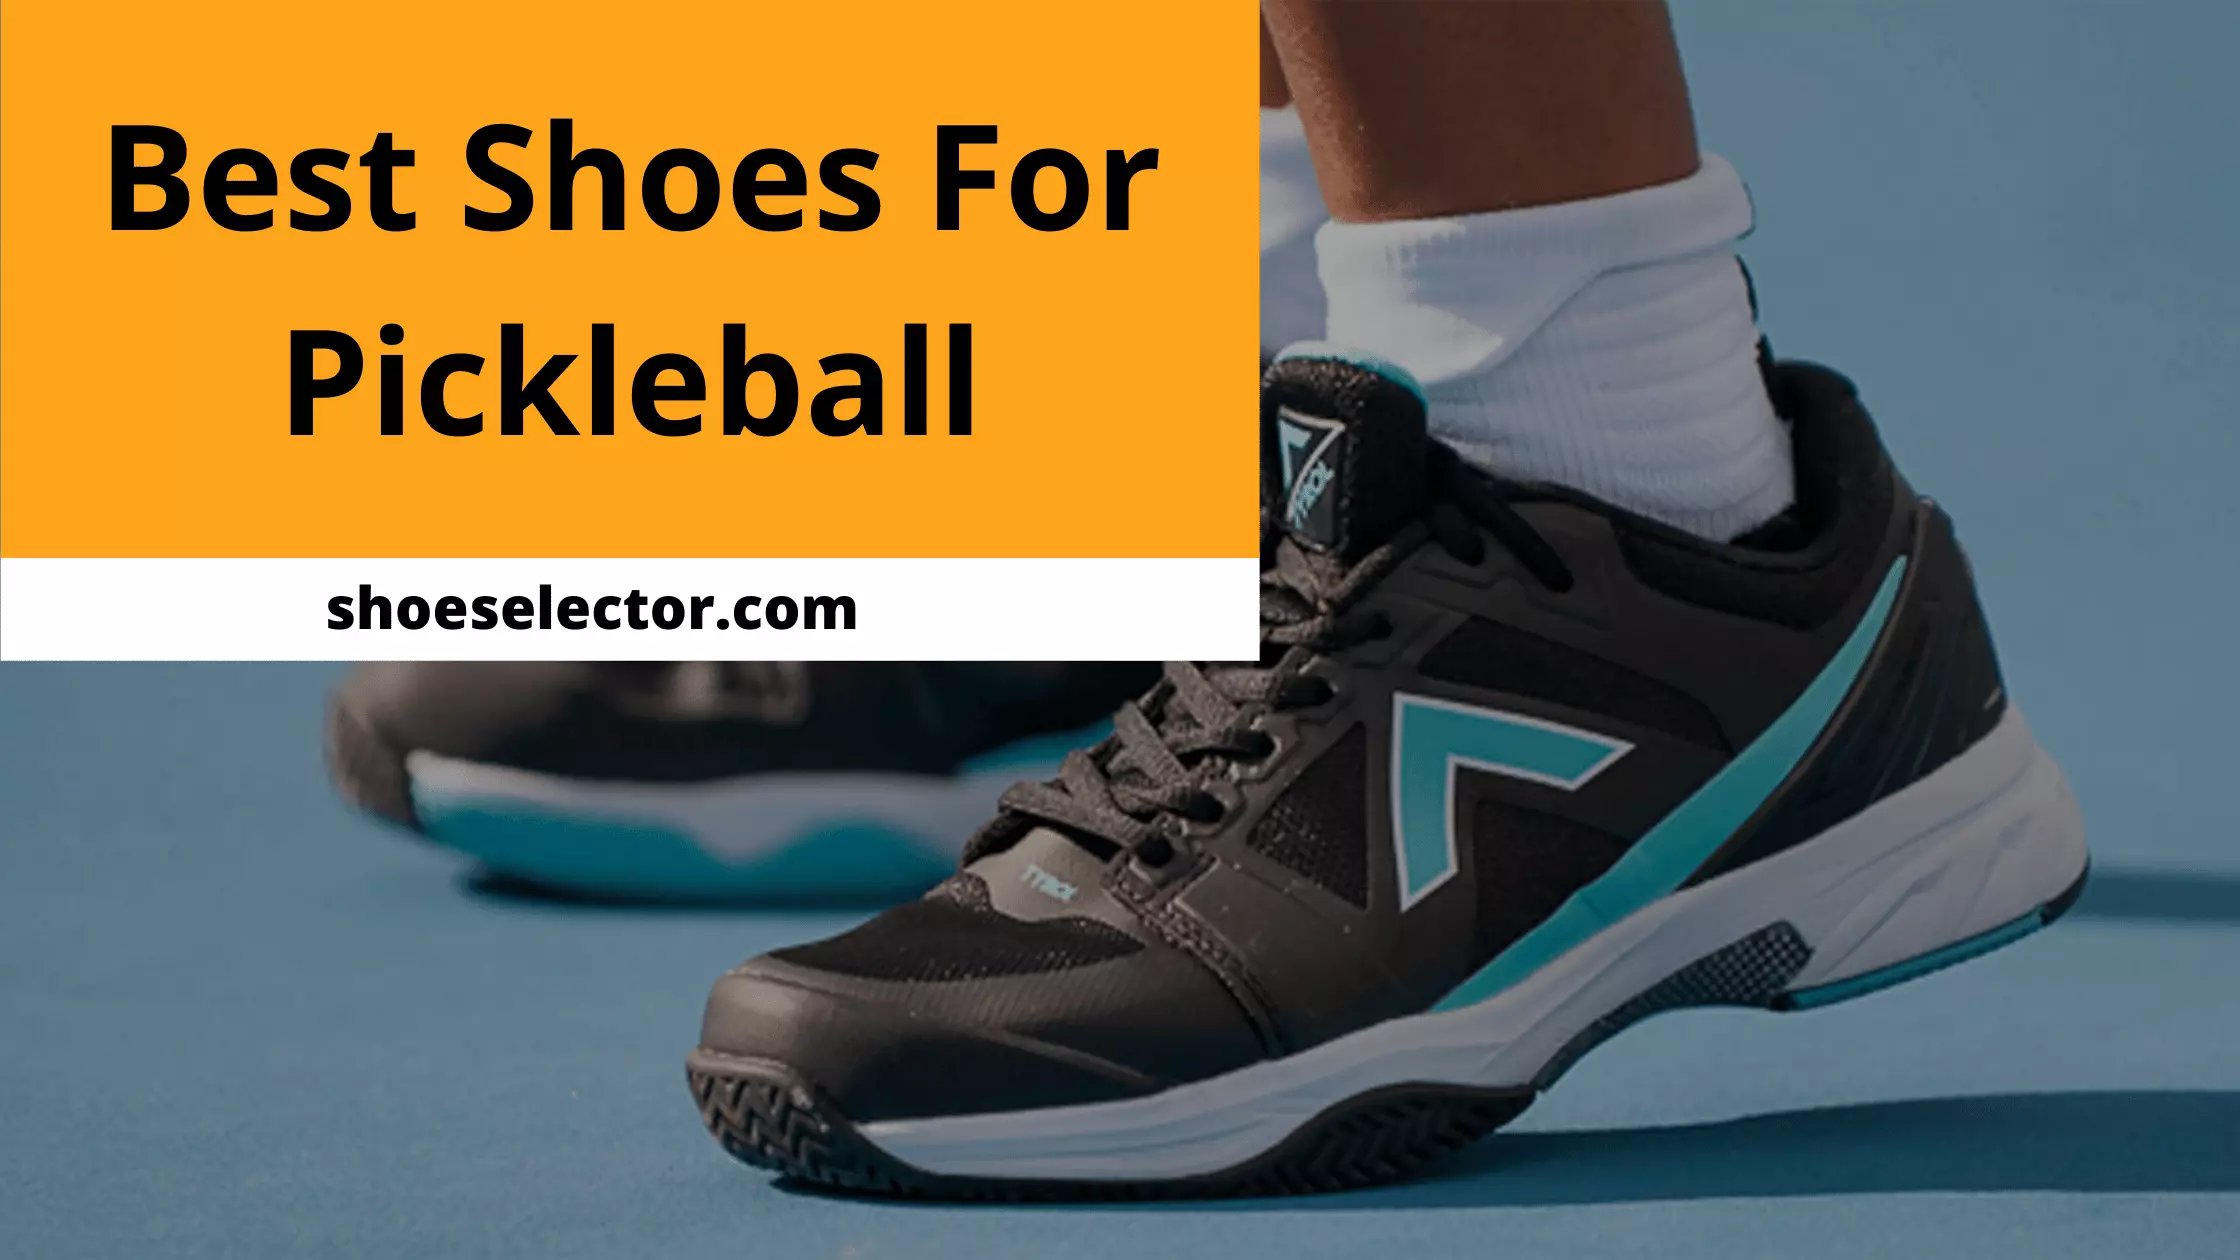 Best Shoes For Pickleball - Complete Buying Guides